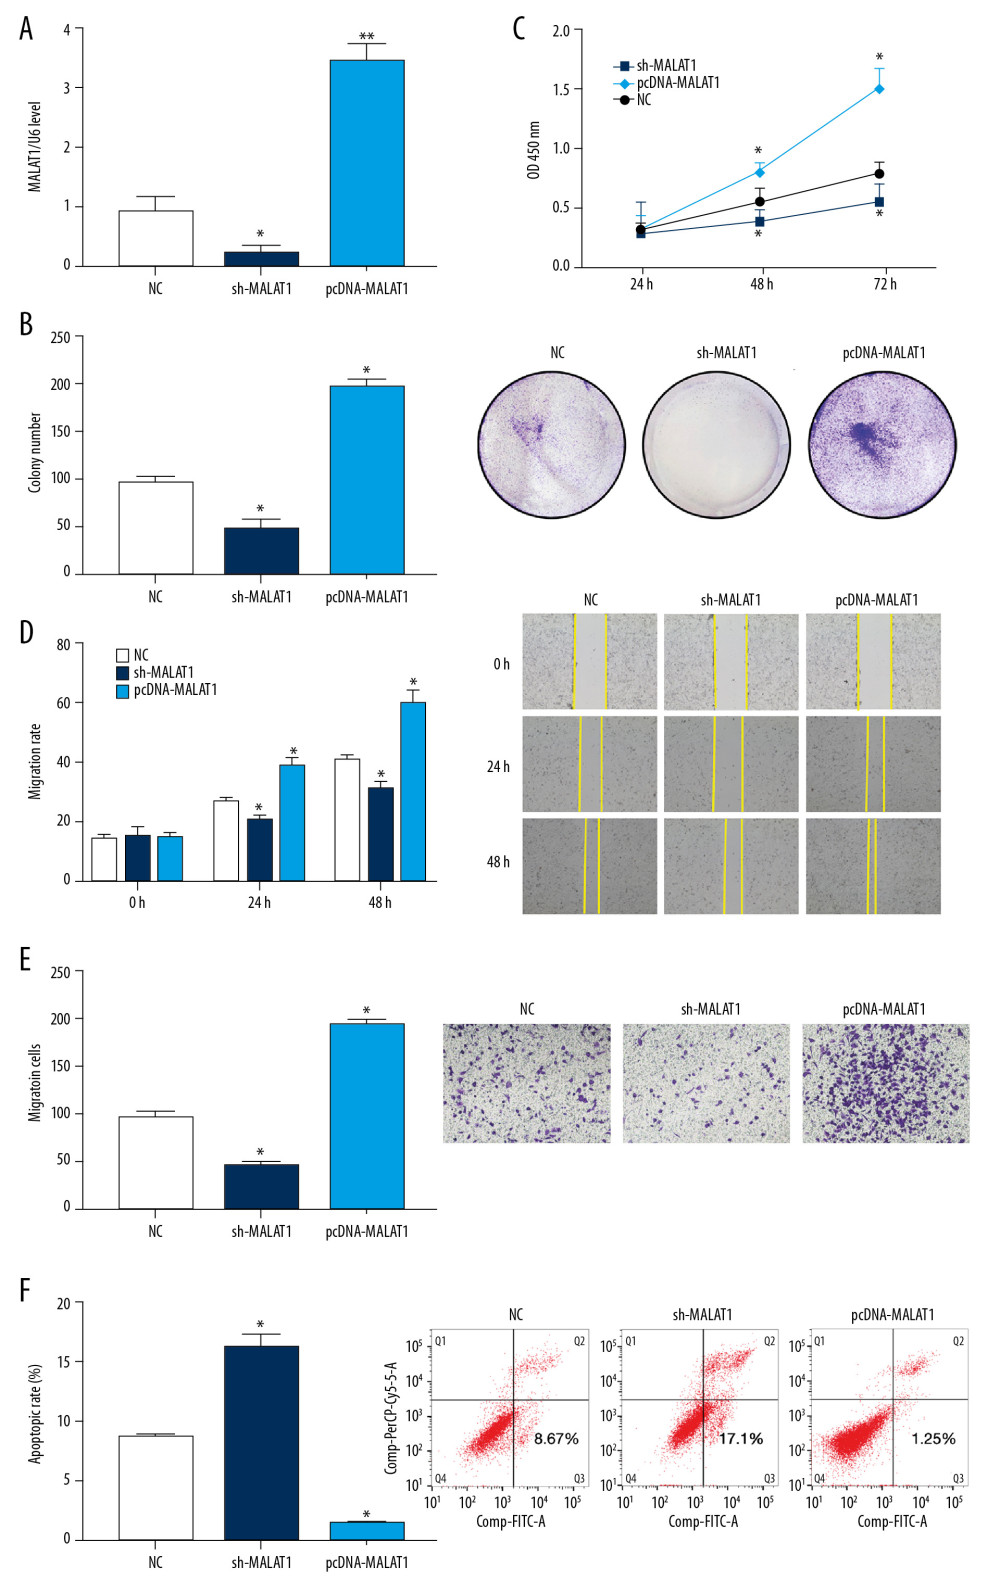 Silencing of long-chain non-coding RNA metastasis-related lung adenocarcinoma transcript 1 (lncRNA MALAT1) significantly inhibits the proliferation and migration of hPASMCs. (A) Levels of lncRNA MALAT1 expression in hPASMCs with silenced and overexpressed lncRNA MALAT1. (B) Numbers of clones formed by hPASMCs with silenced and overexpressed lncRNA MALAT1. (C) Cell counting kit-8 (CCK-8) assays of the proliferation of hPASMCs with silenced and overexpressed lncRNA MALAT1. (D) Wound healing assay assessing the effect of lncRNA MALAT1 silencing and overexpression on the migration ability of hPASMC cells. (E) Transwell assays assessing the effect of lncRNA MALAT1 silencing and overexpressed on the migration of hPASMC cells. (F) Flow cytometry assays of the effect of lncRNA MALAT1 silencing and overexpression on hPASMC cell apoptosis.* p<0.05, ** p<0.01 compared with the no template control (NC) group.